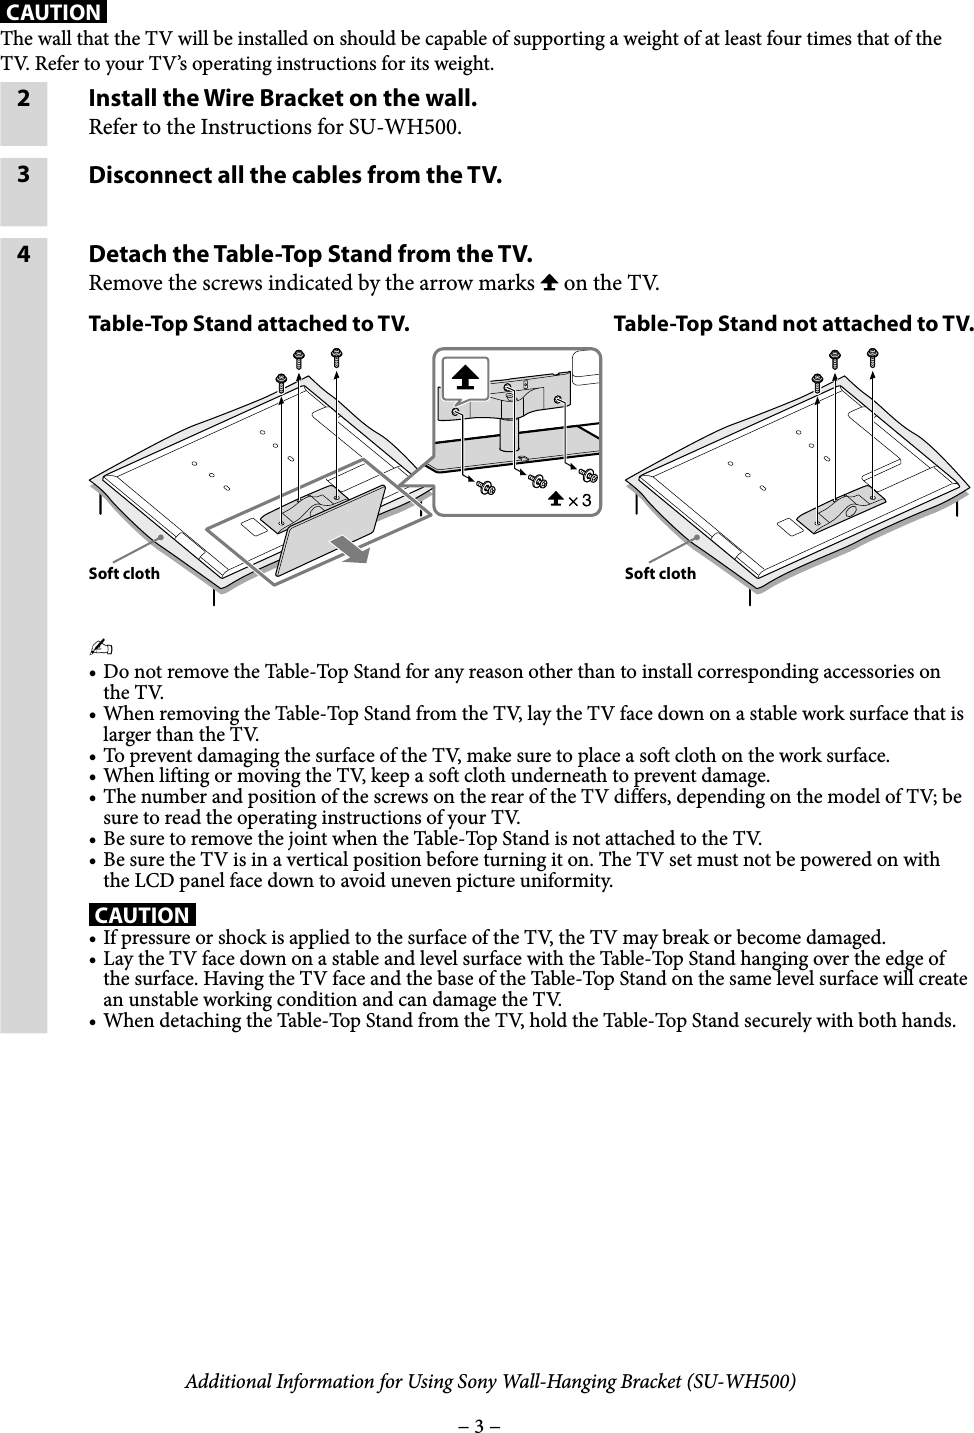 Page 3 of 5 - Sony KDL-46HX820 SU-WH500 User Manual Additional Information For Using Sony® Wall-Hanging Bracket (SU-WH500) Flyer ADXG100111